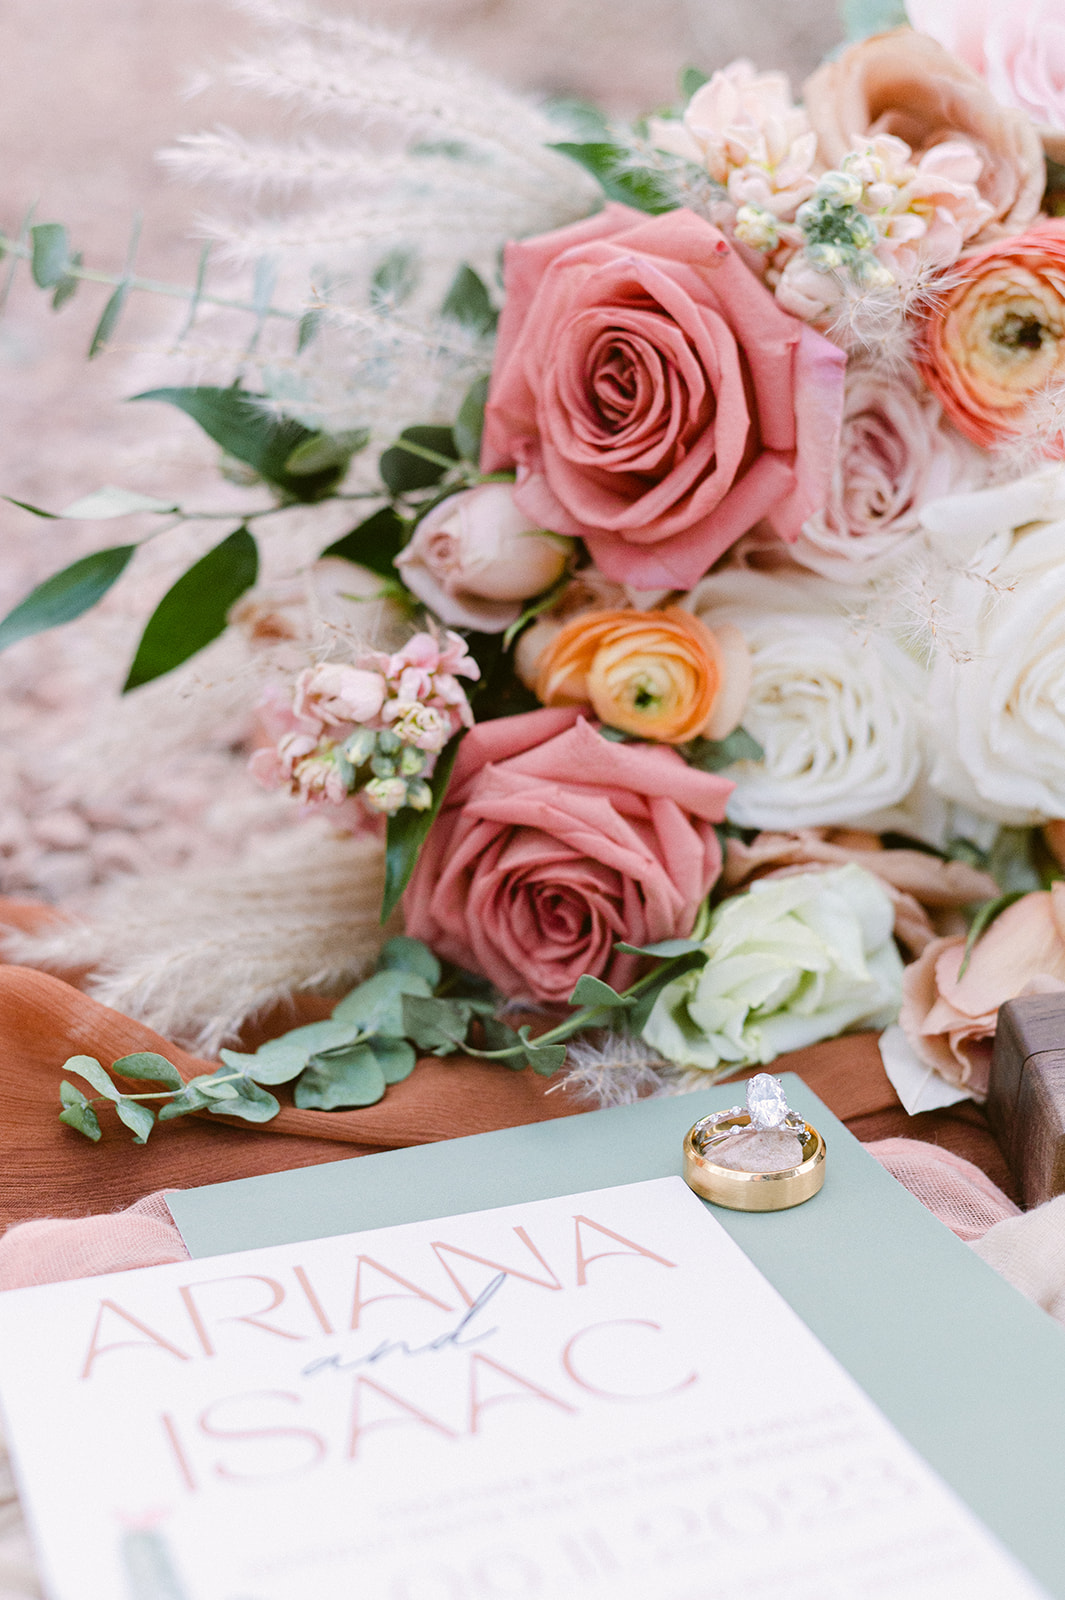 peach, yellow and blush wedding florals with displayed with wedding invitation and ring wedding flat lay